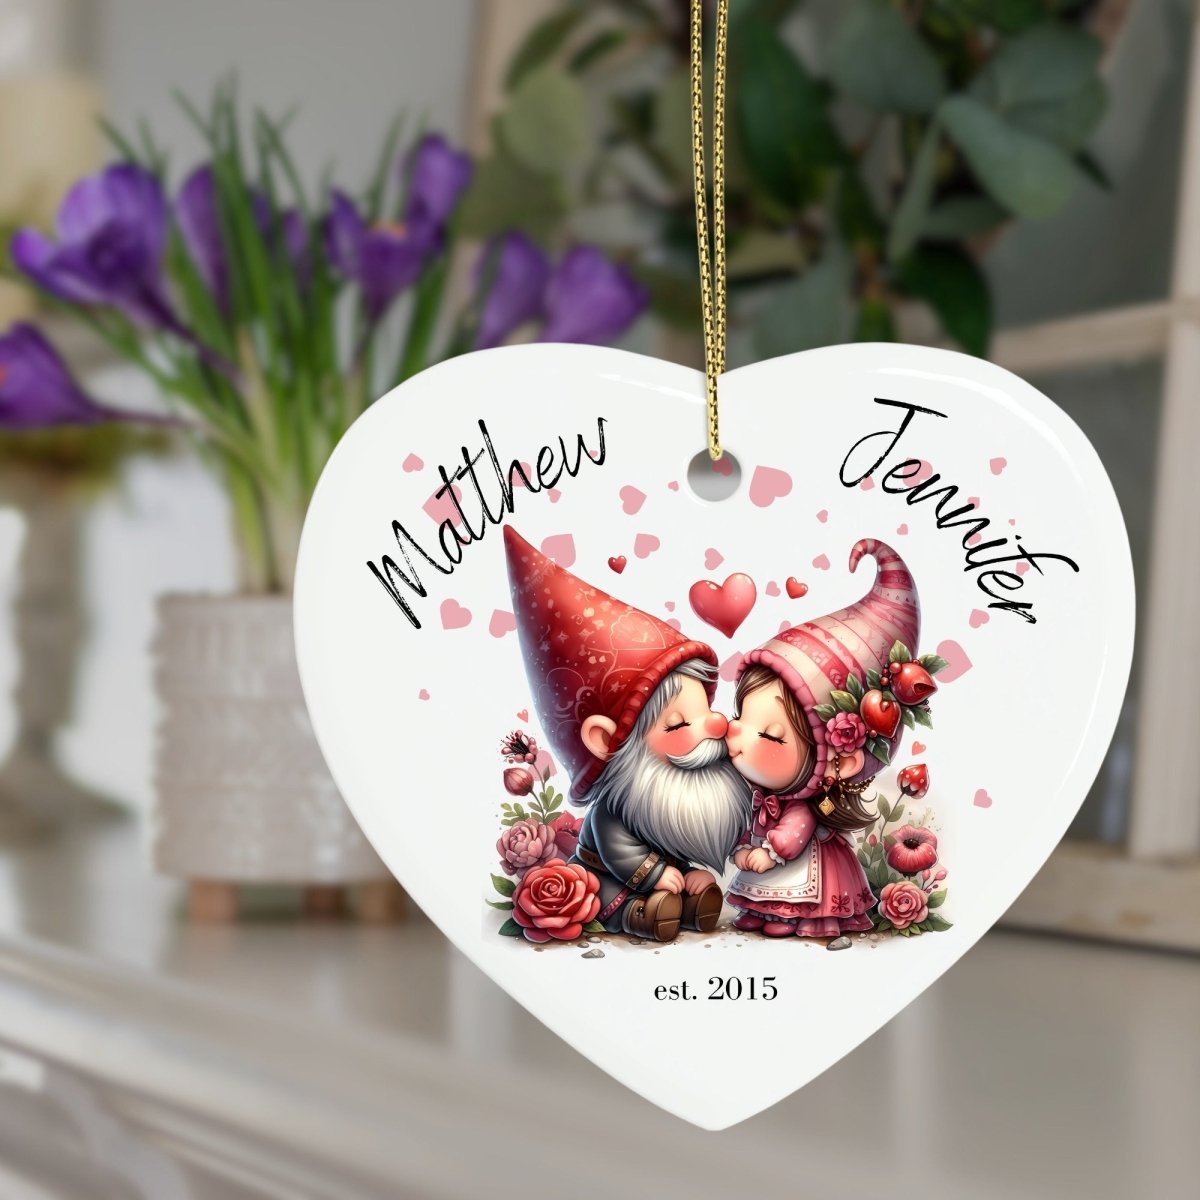 Cute personalised Gnome Couple Ornament Ceramic Heart Ornament Lovers Keepsake Valentines Day Gift Anniversary Gift Idea for Soulmates - Everything Pixel